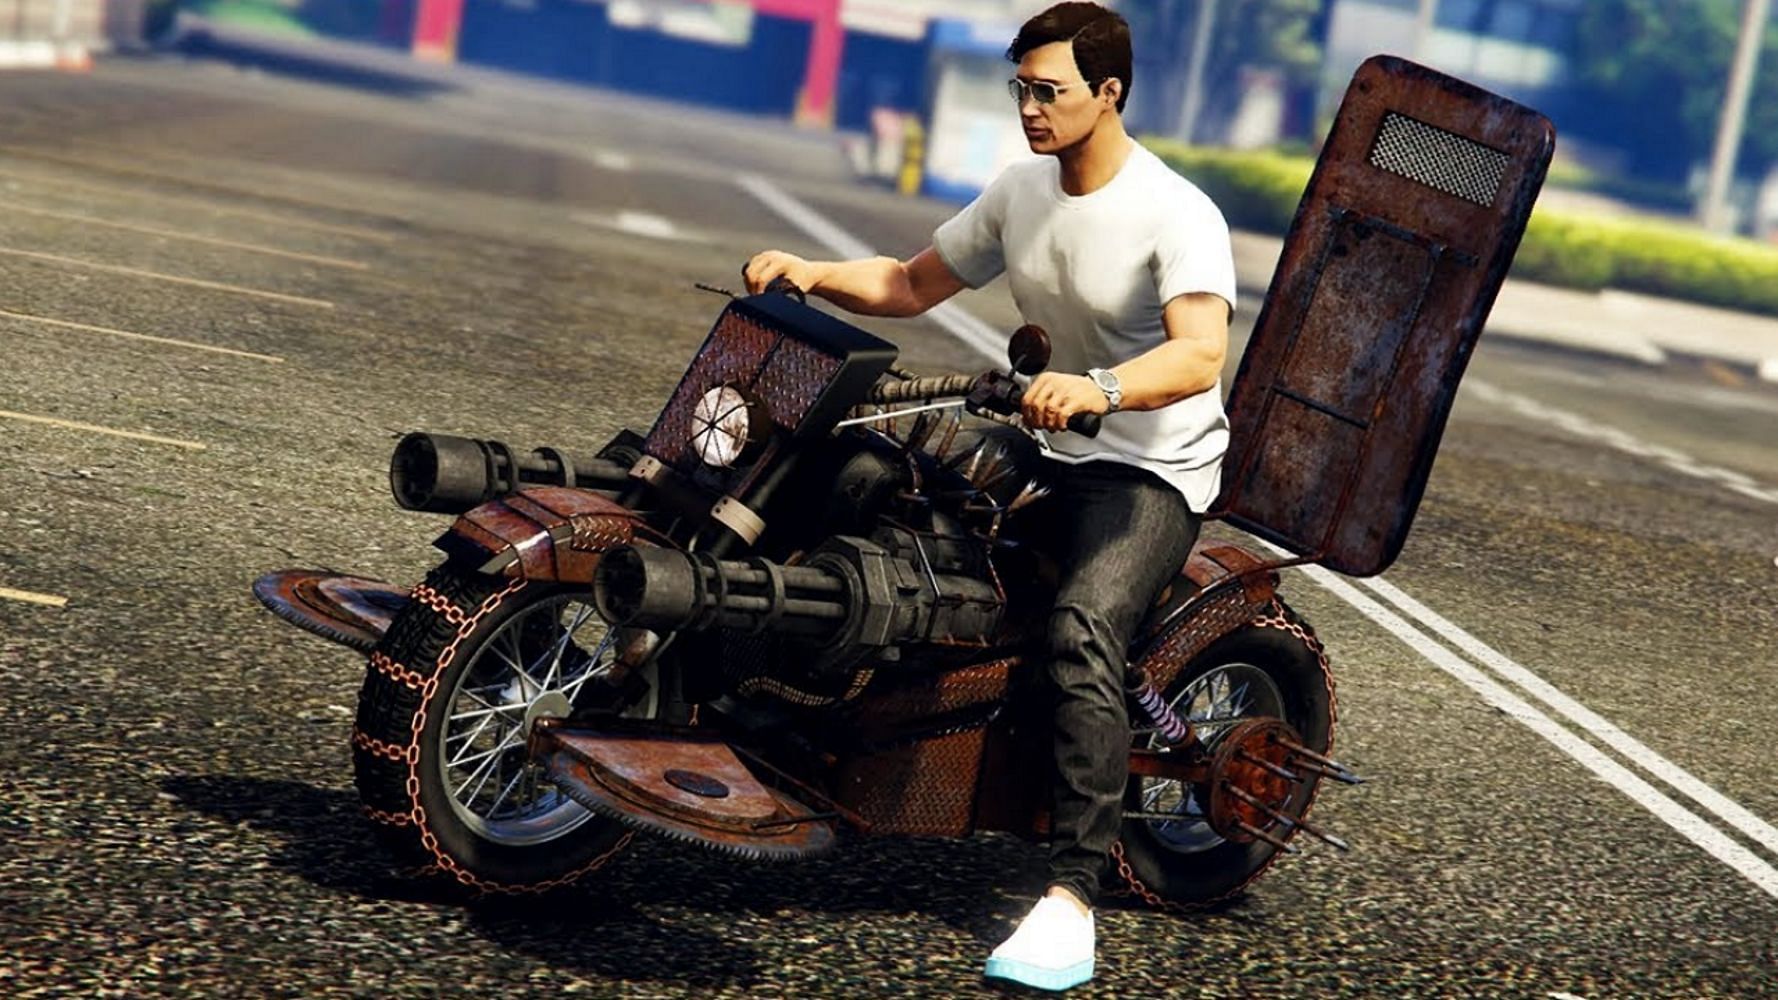 The Deathbike is one of the most popular Arena Wars vehicles (Image via Rockstar Games)